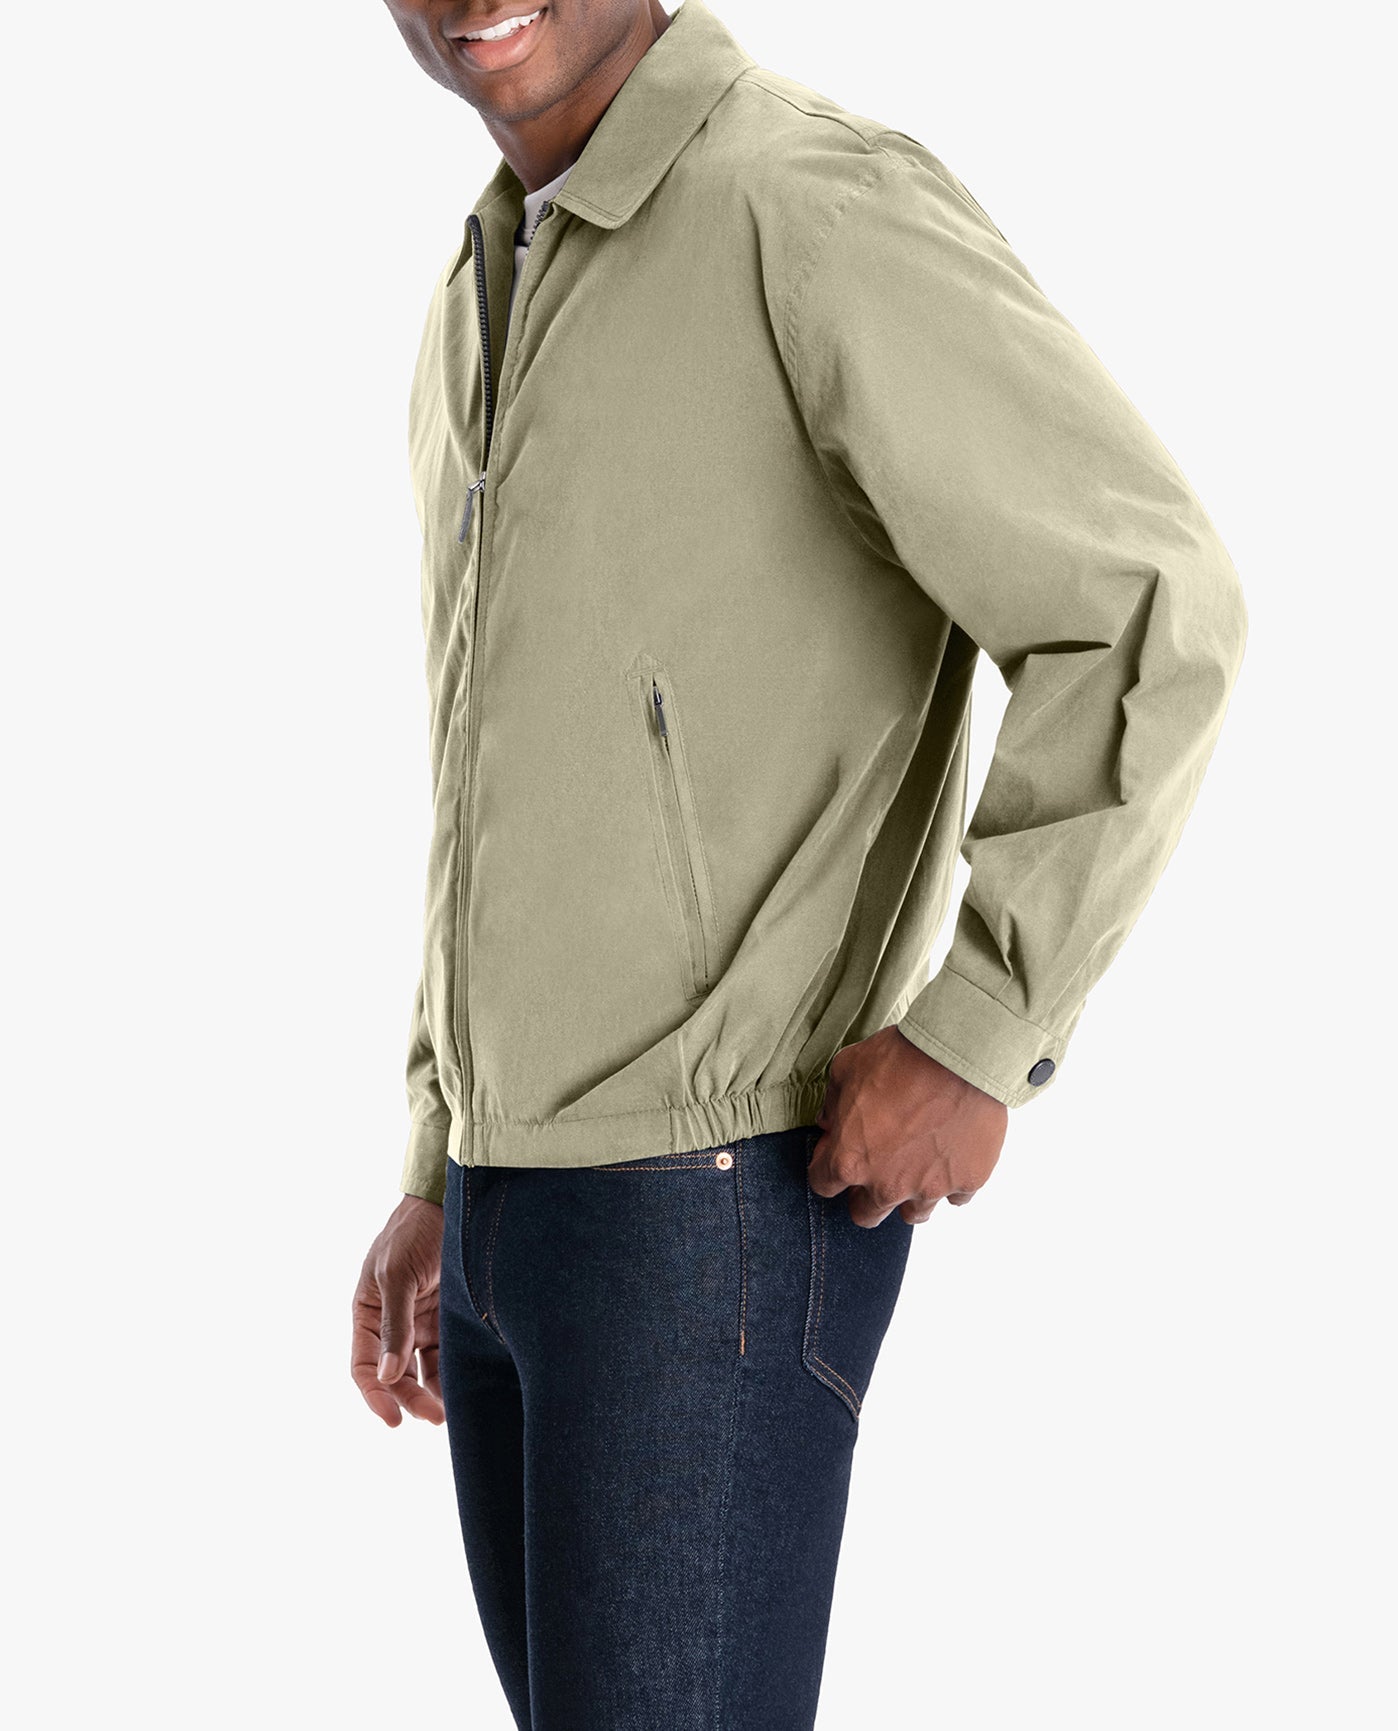 BACK OF LIGHT WEIGHT ZIP FRONT GOLF JACKET | CEMENT